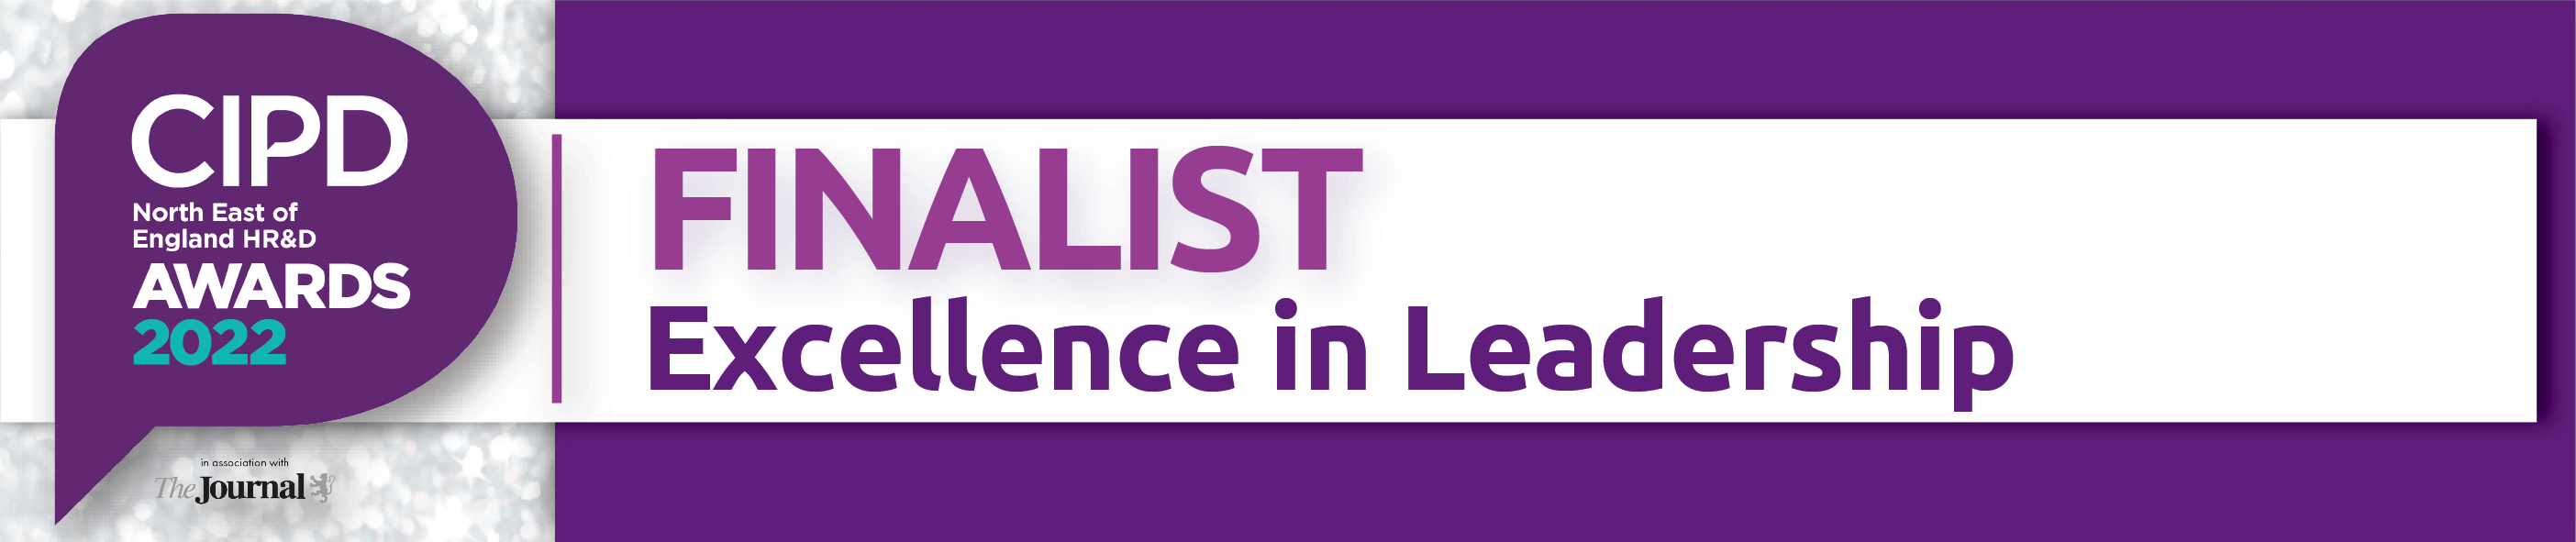 CIPD - Finalist, excellence in leadership